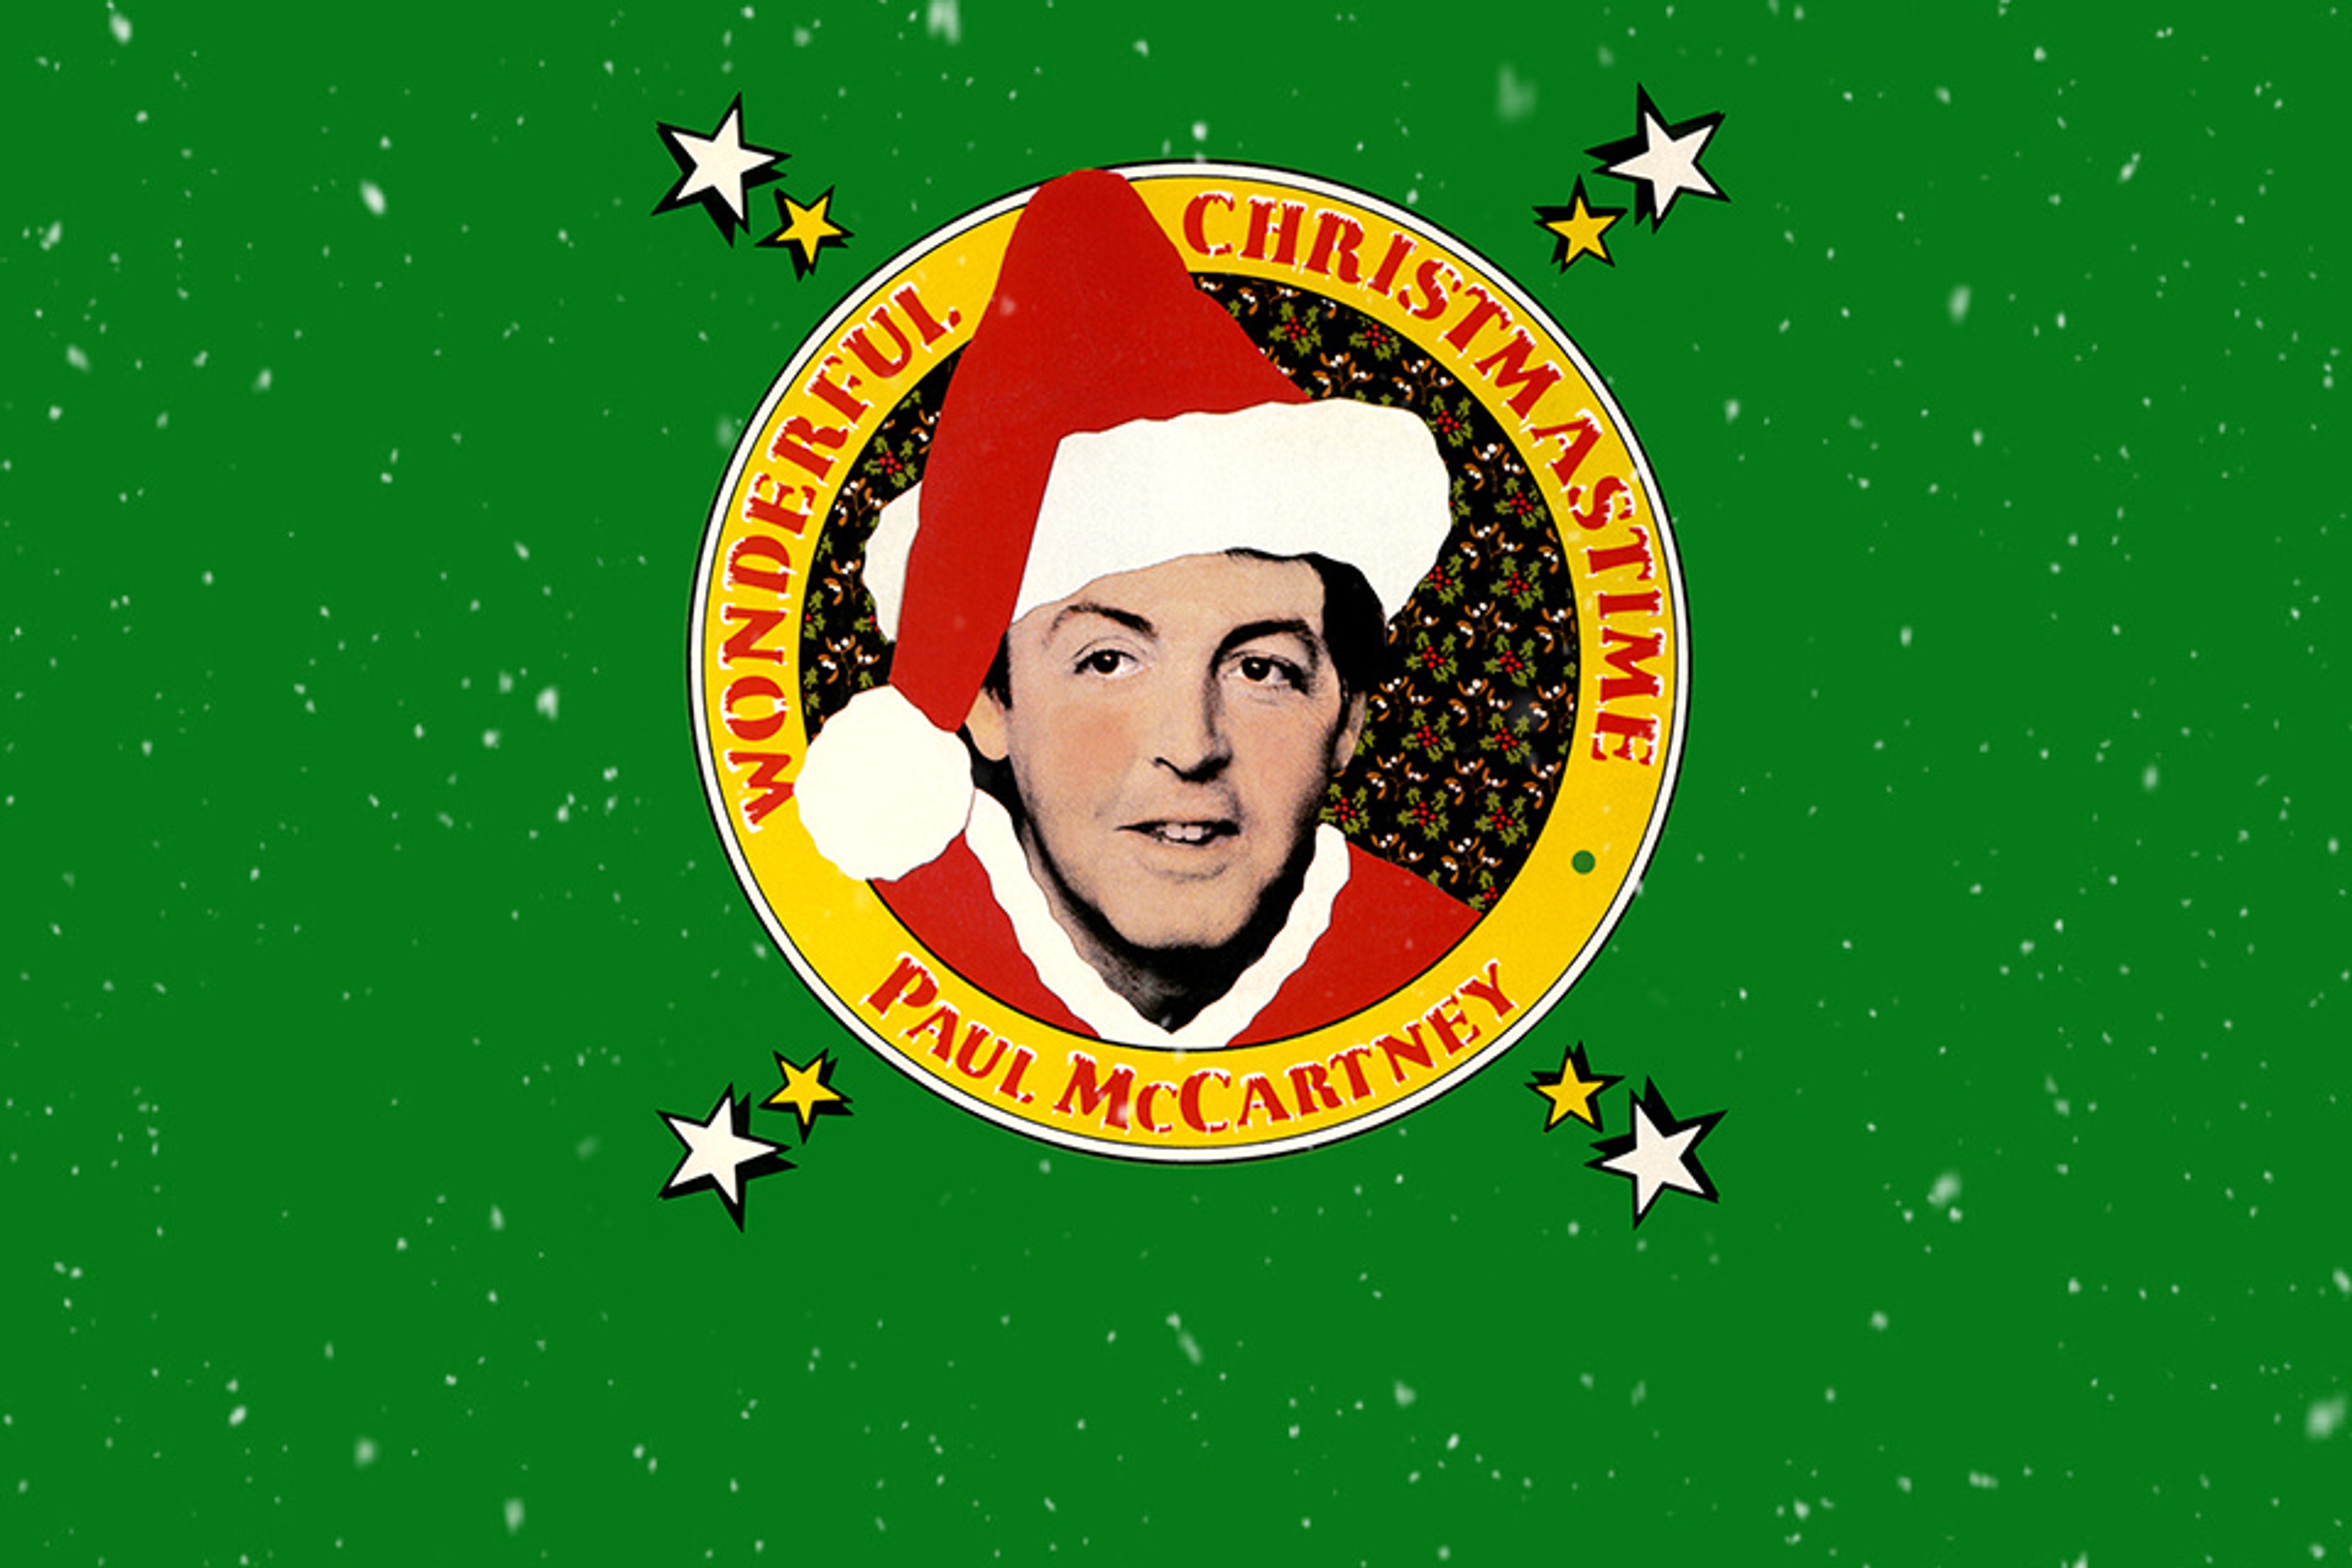 Photo of the cover for Paul's song 'Wonderful Christmastime'